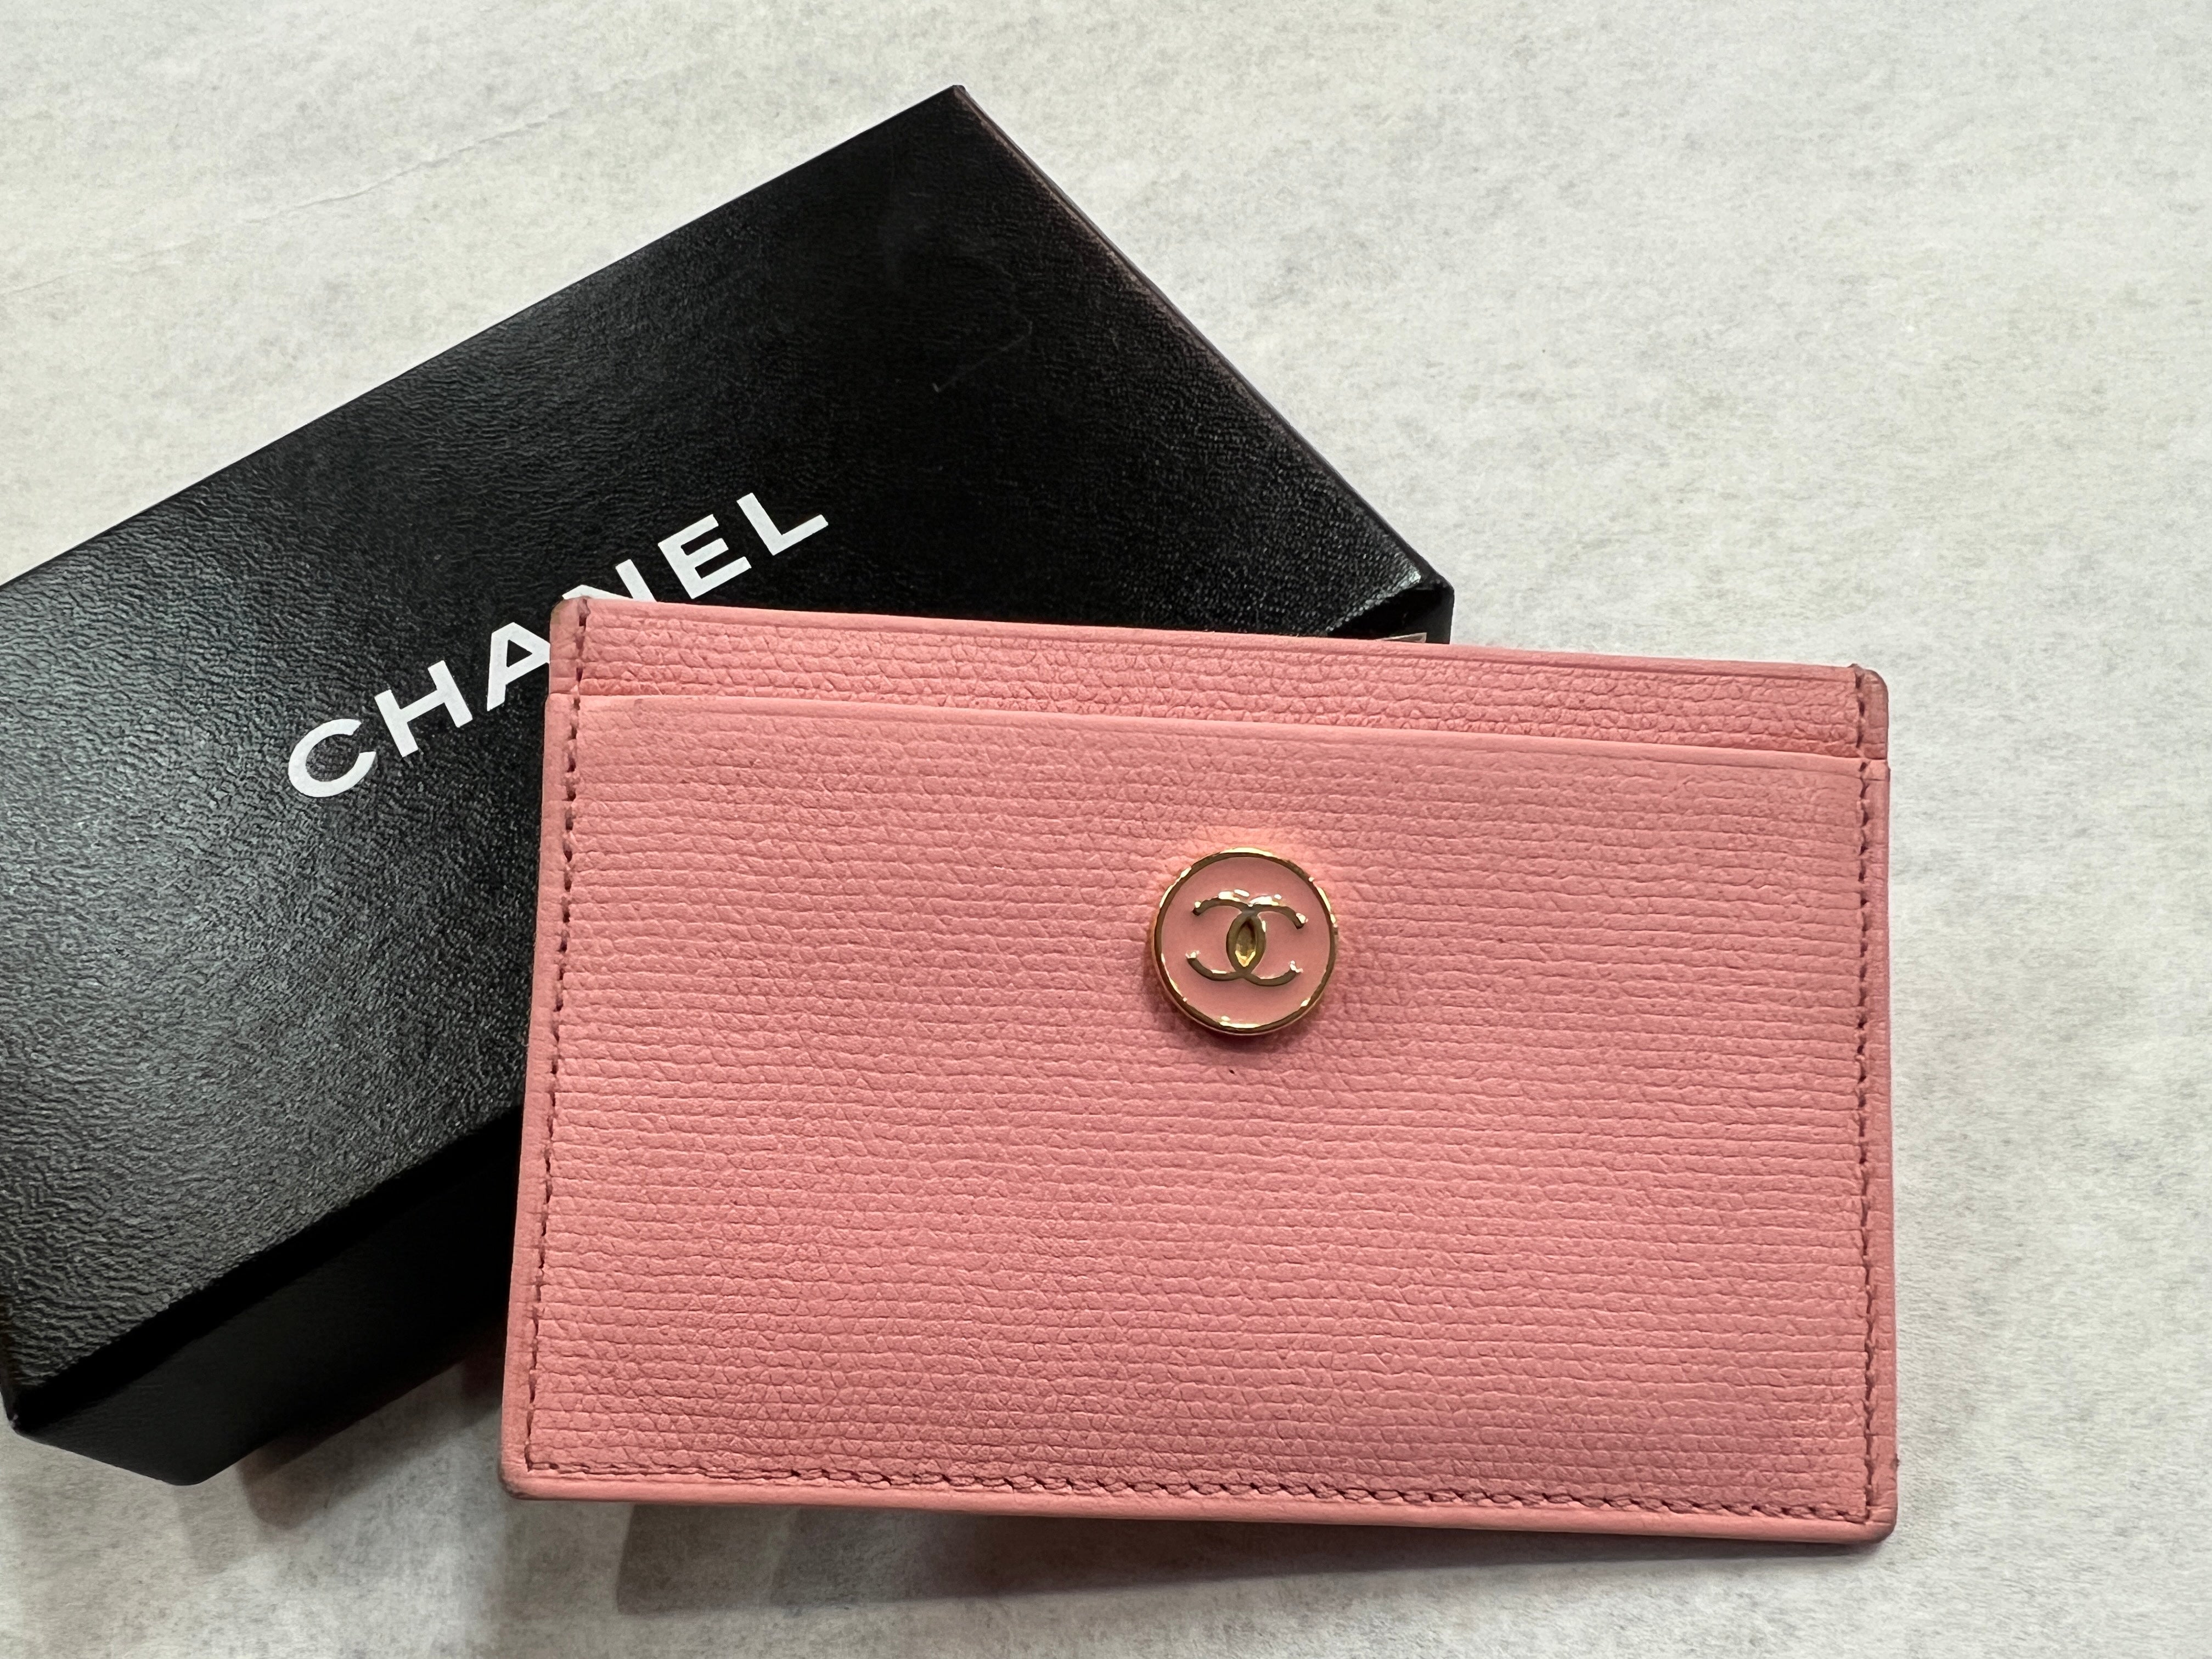 Chanel CC Card Holder Quilted Caviar Gold-tone Black in Caviar